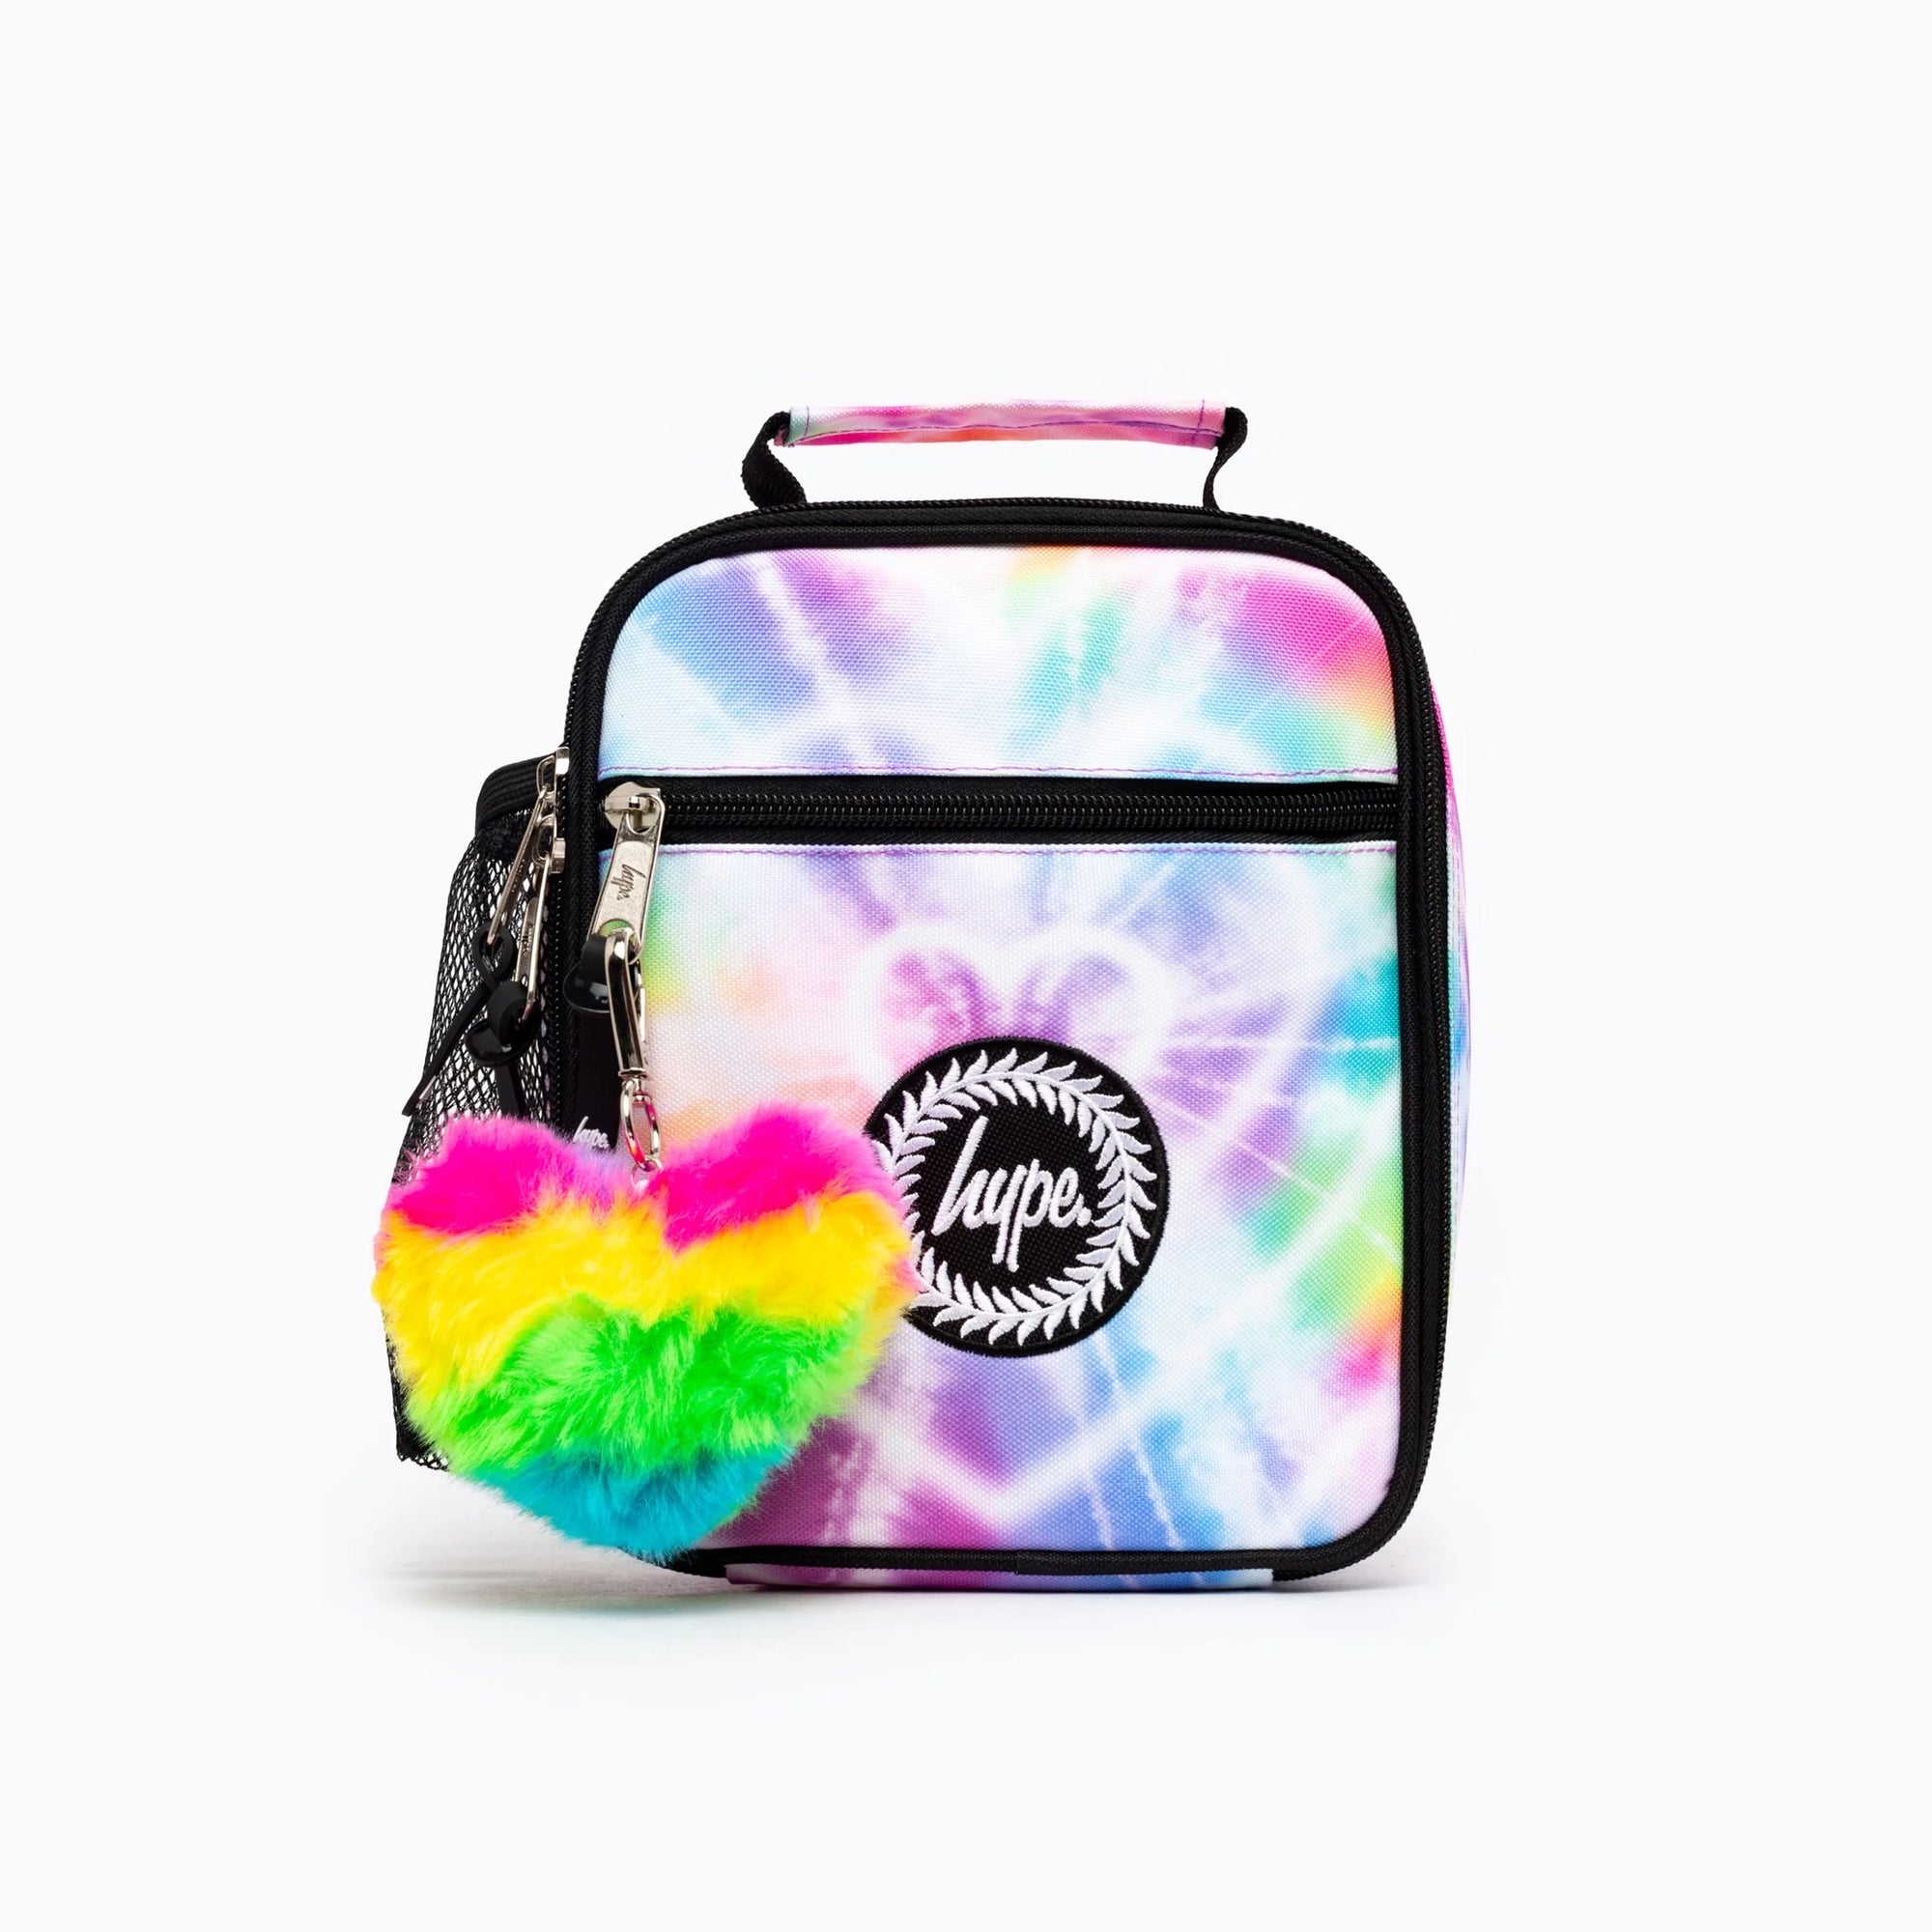 Hype Rainbow Heart Tie Dye Lunch Bag Xucb-122 Accessories ONE SIZE / Multi